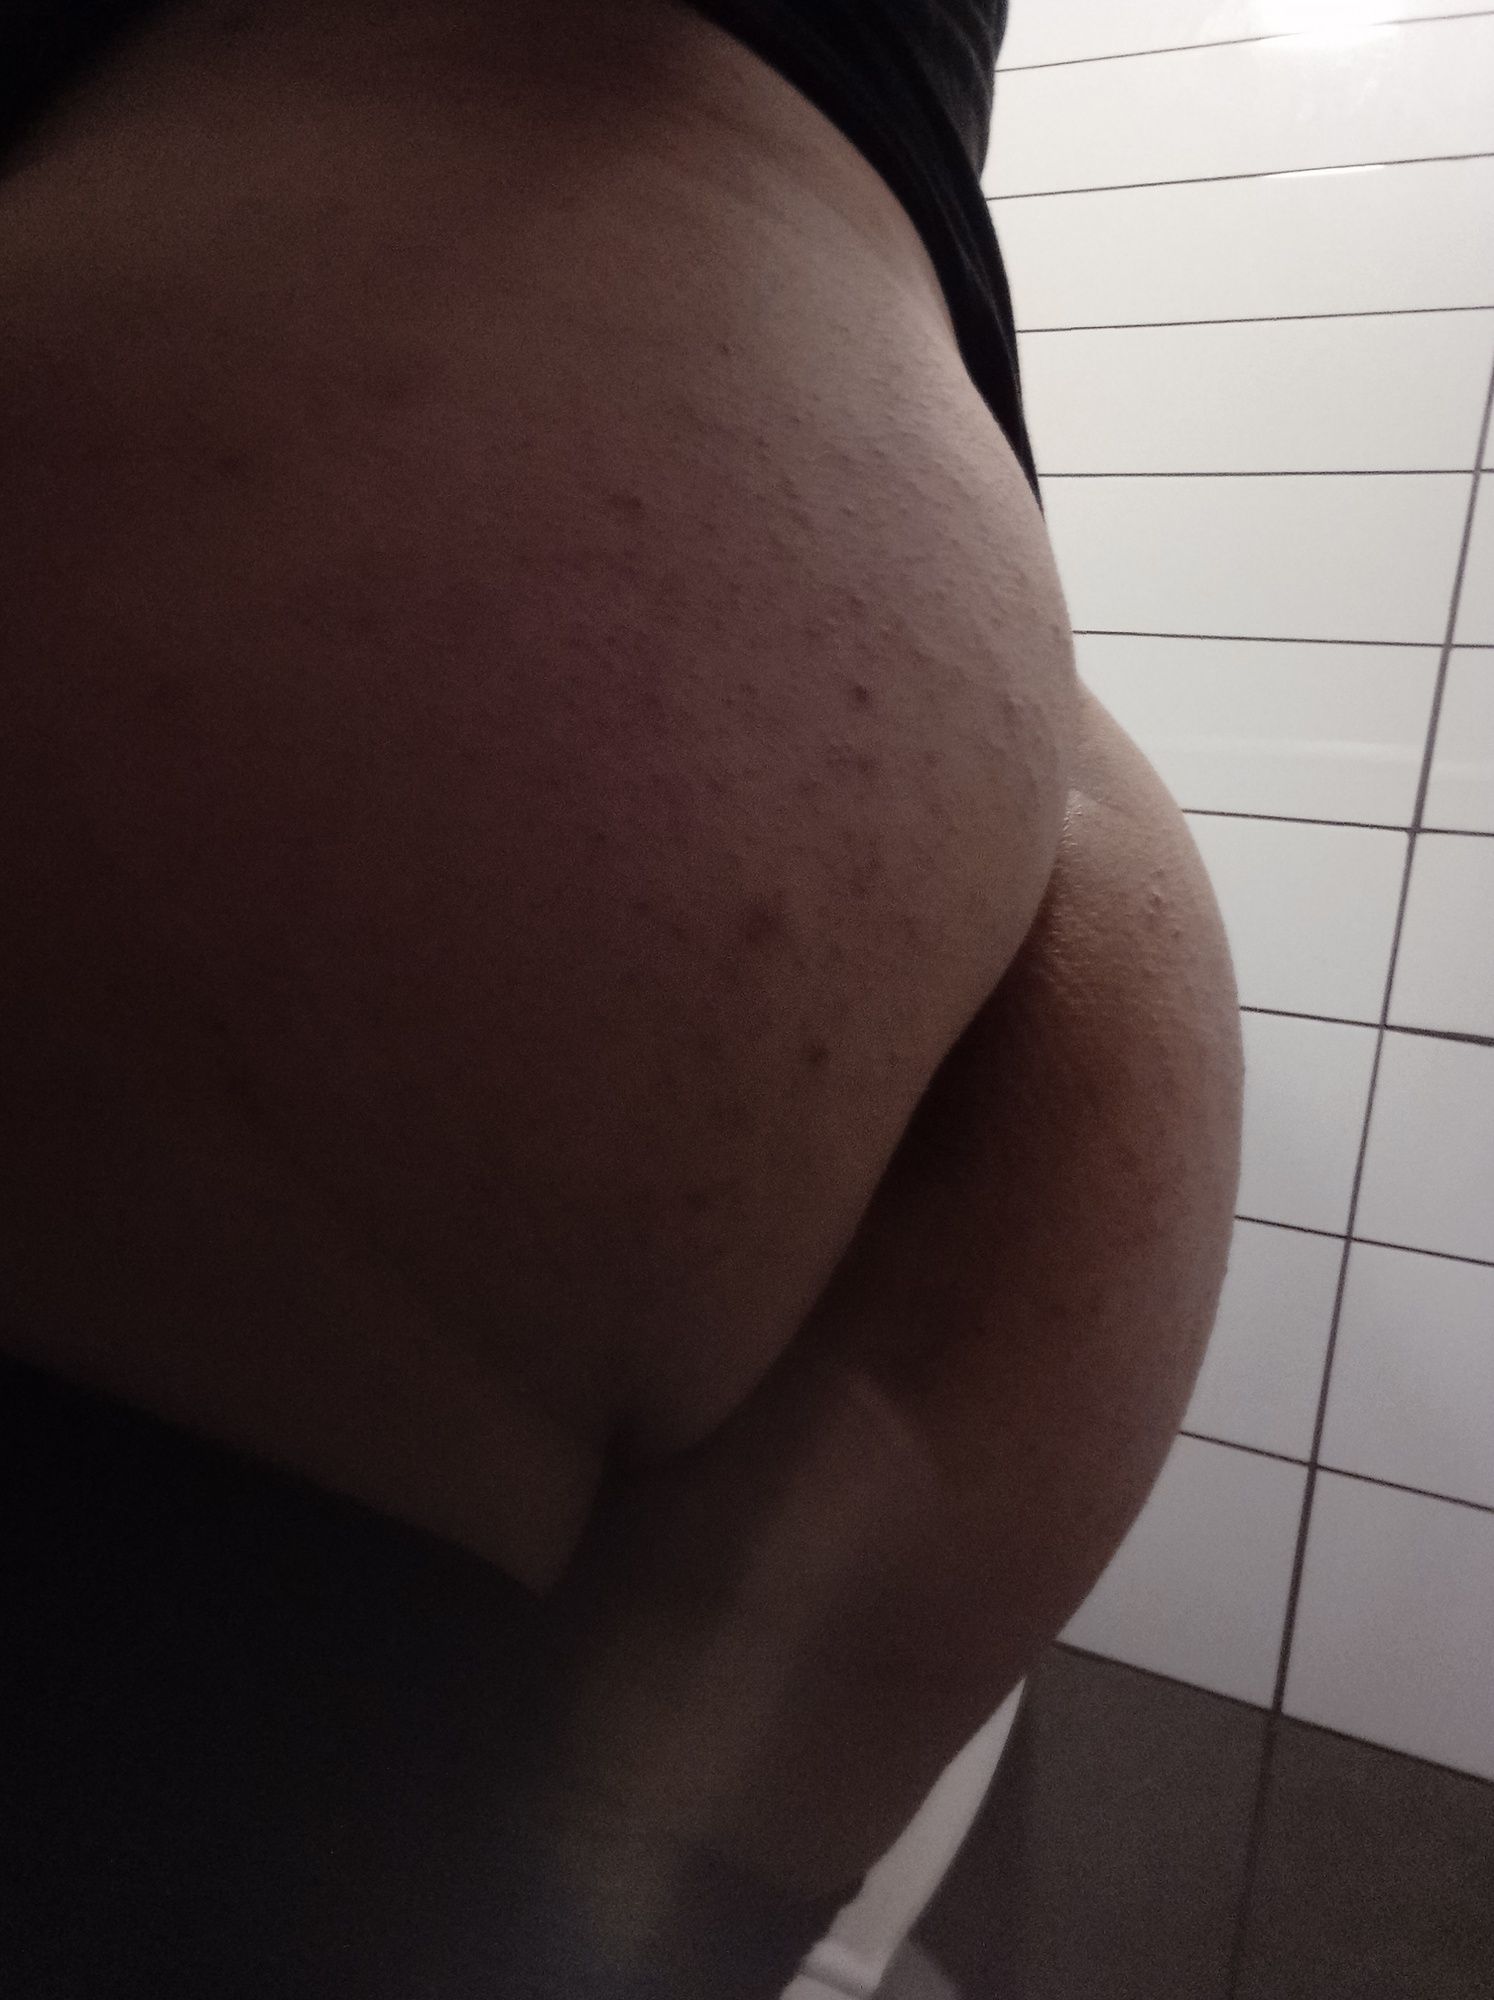 Sissy ass after the gym